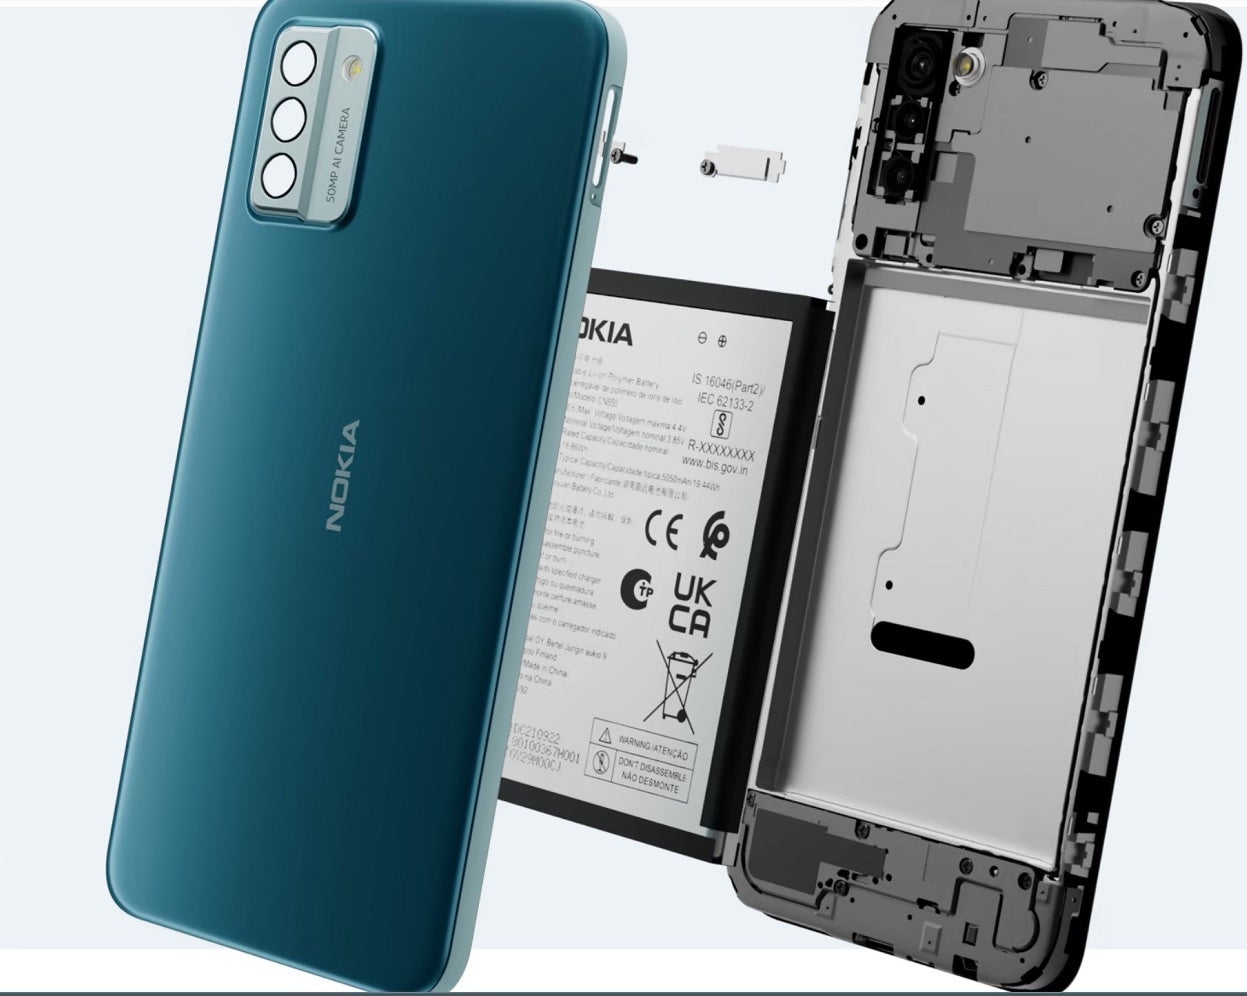 HMD Global launches Nokia G22 repairable smartphone